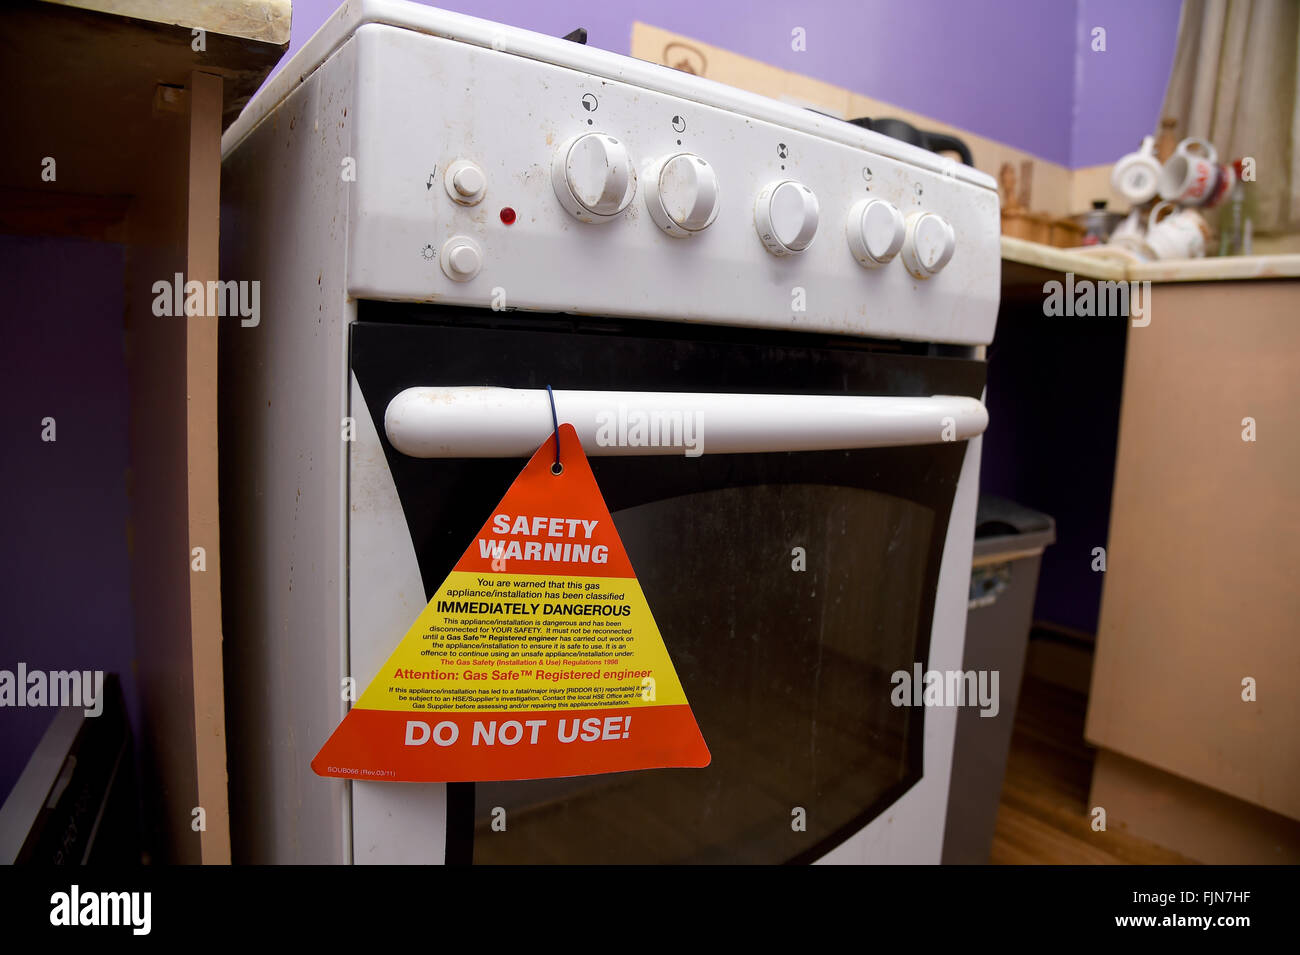 Unsafe gas cooker with safety warning notice, UK Stock Photo